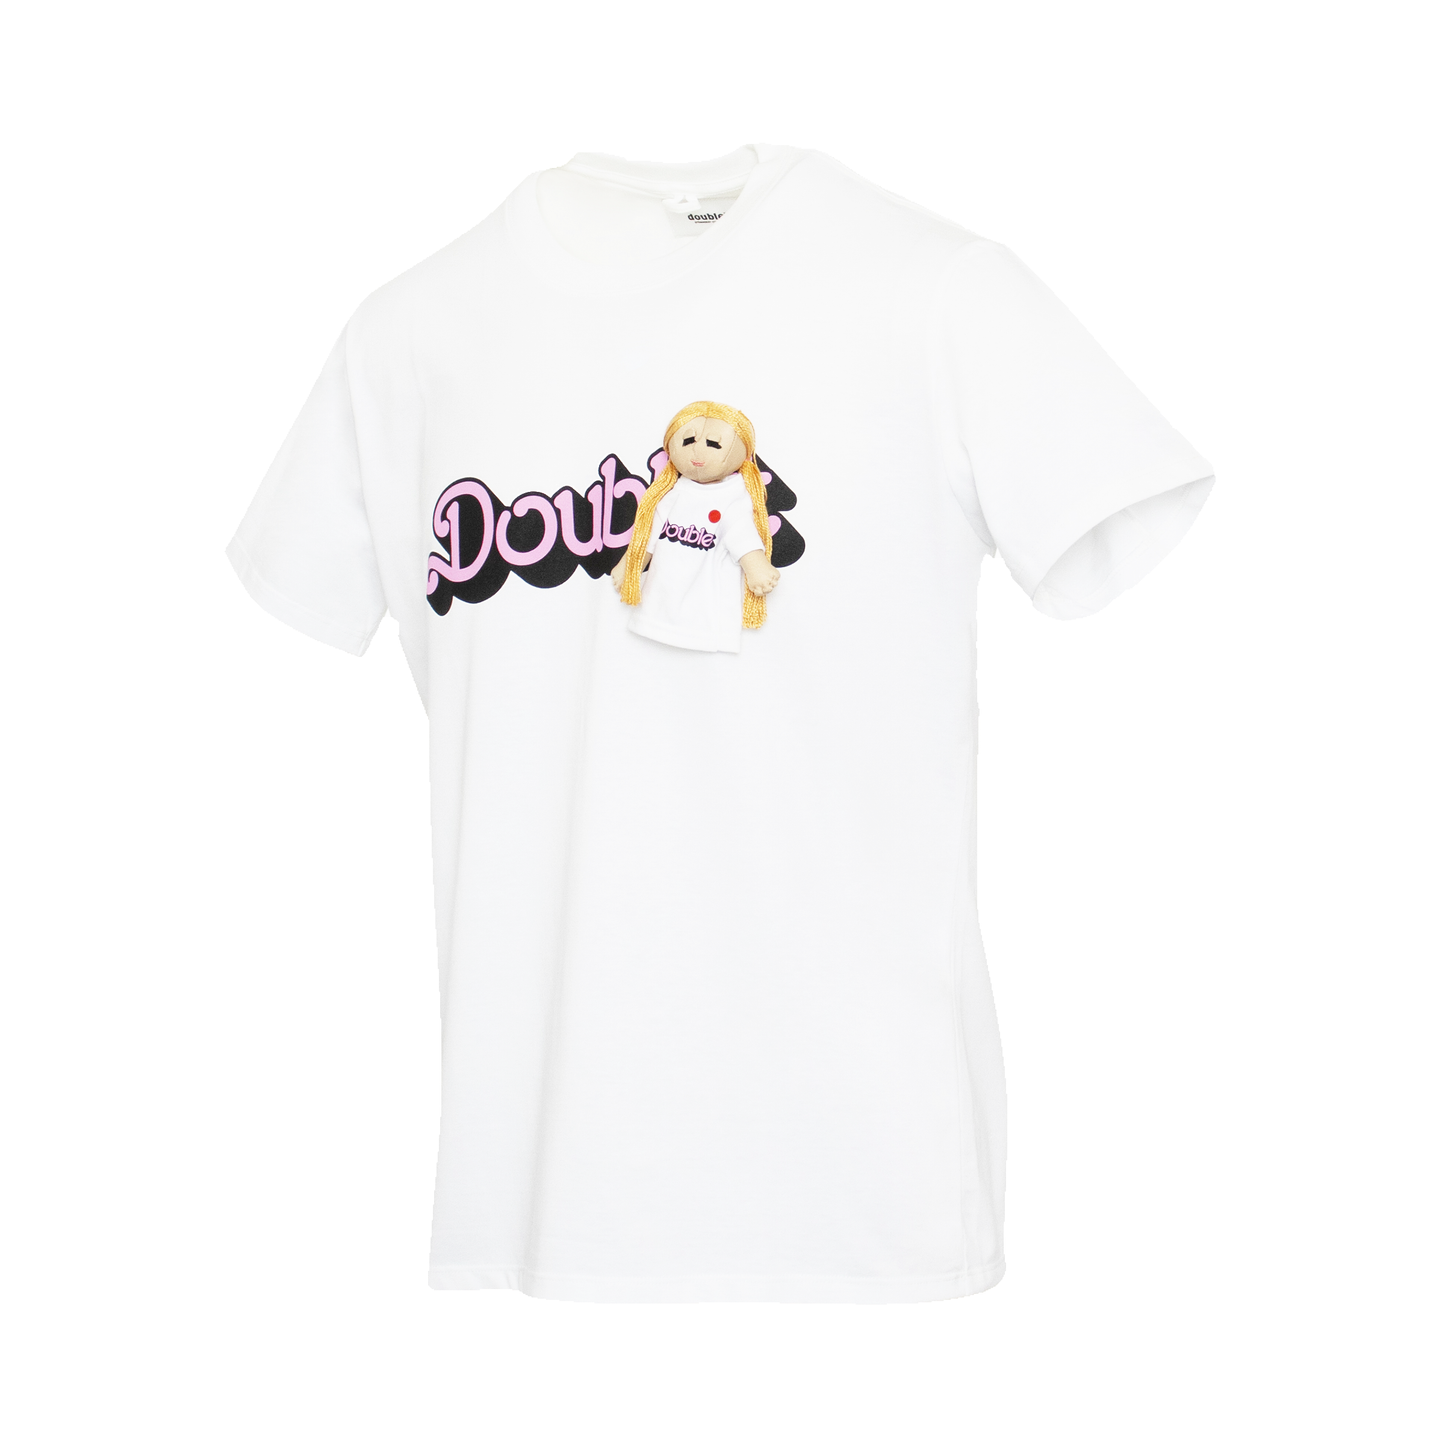 My Doll T-Shirt in White